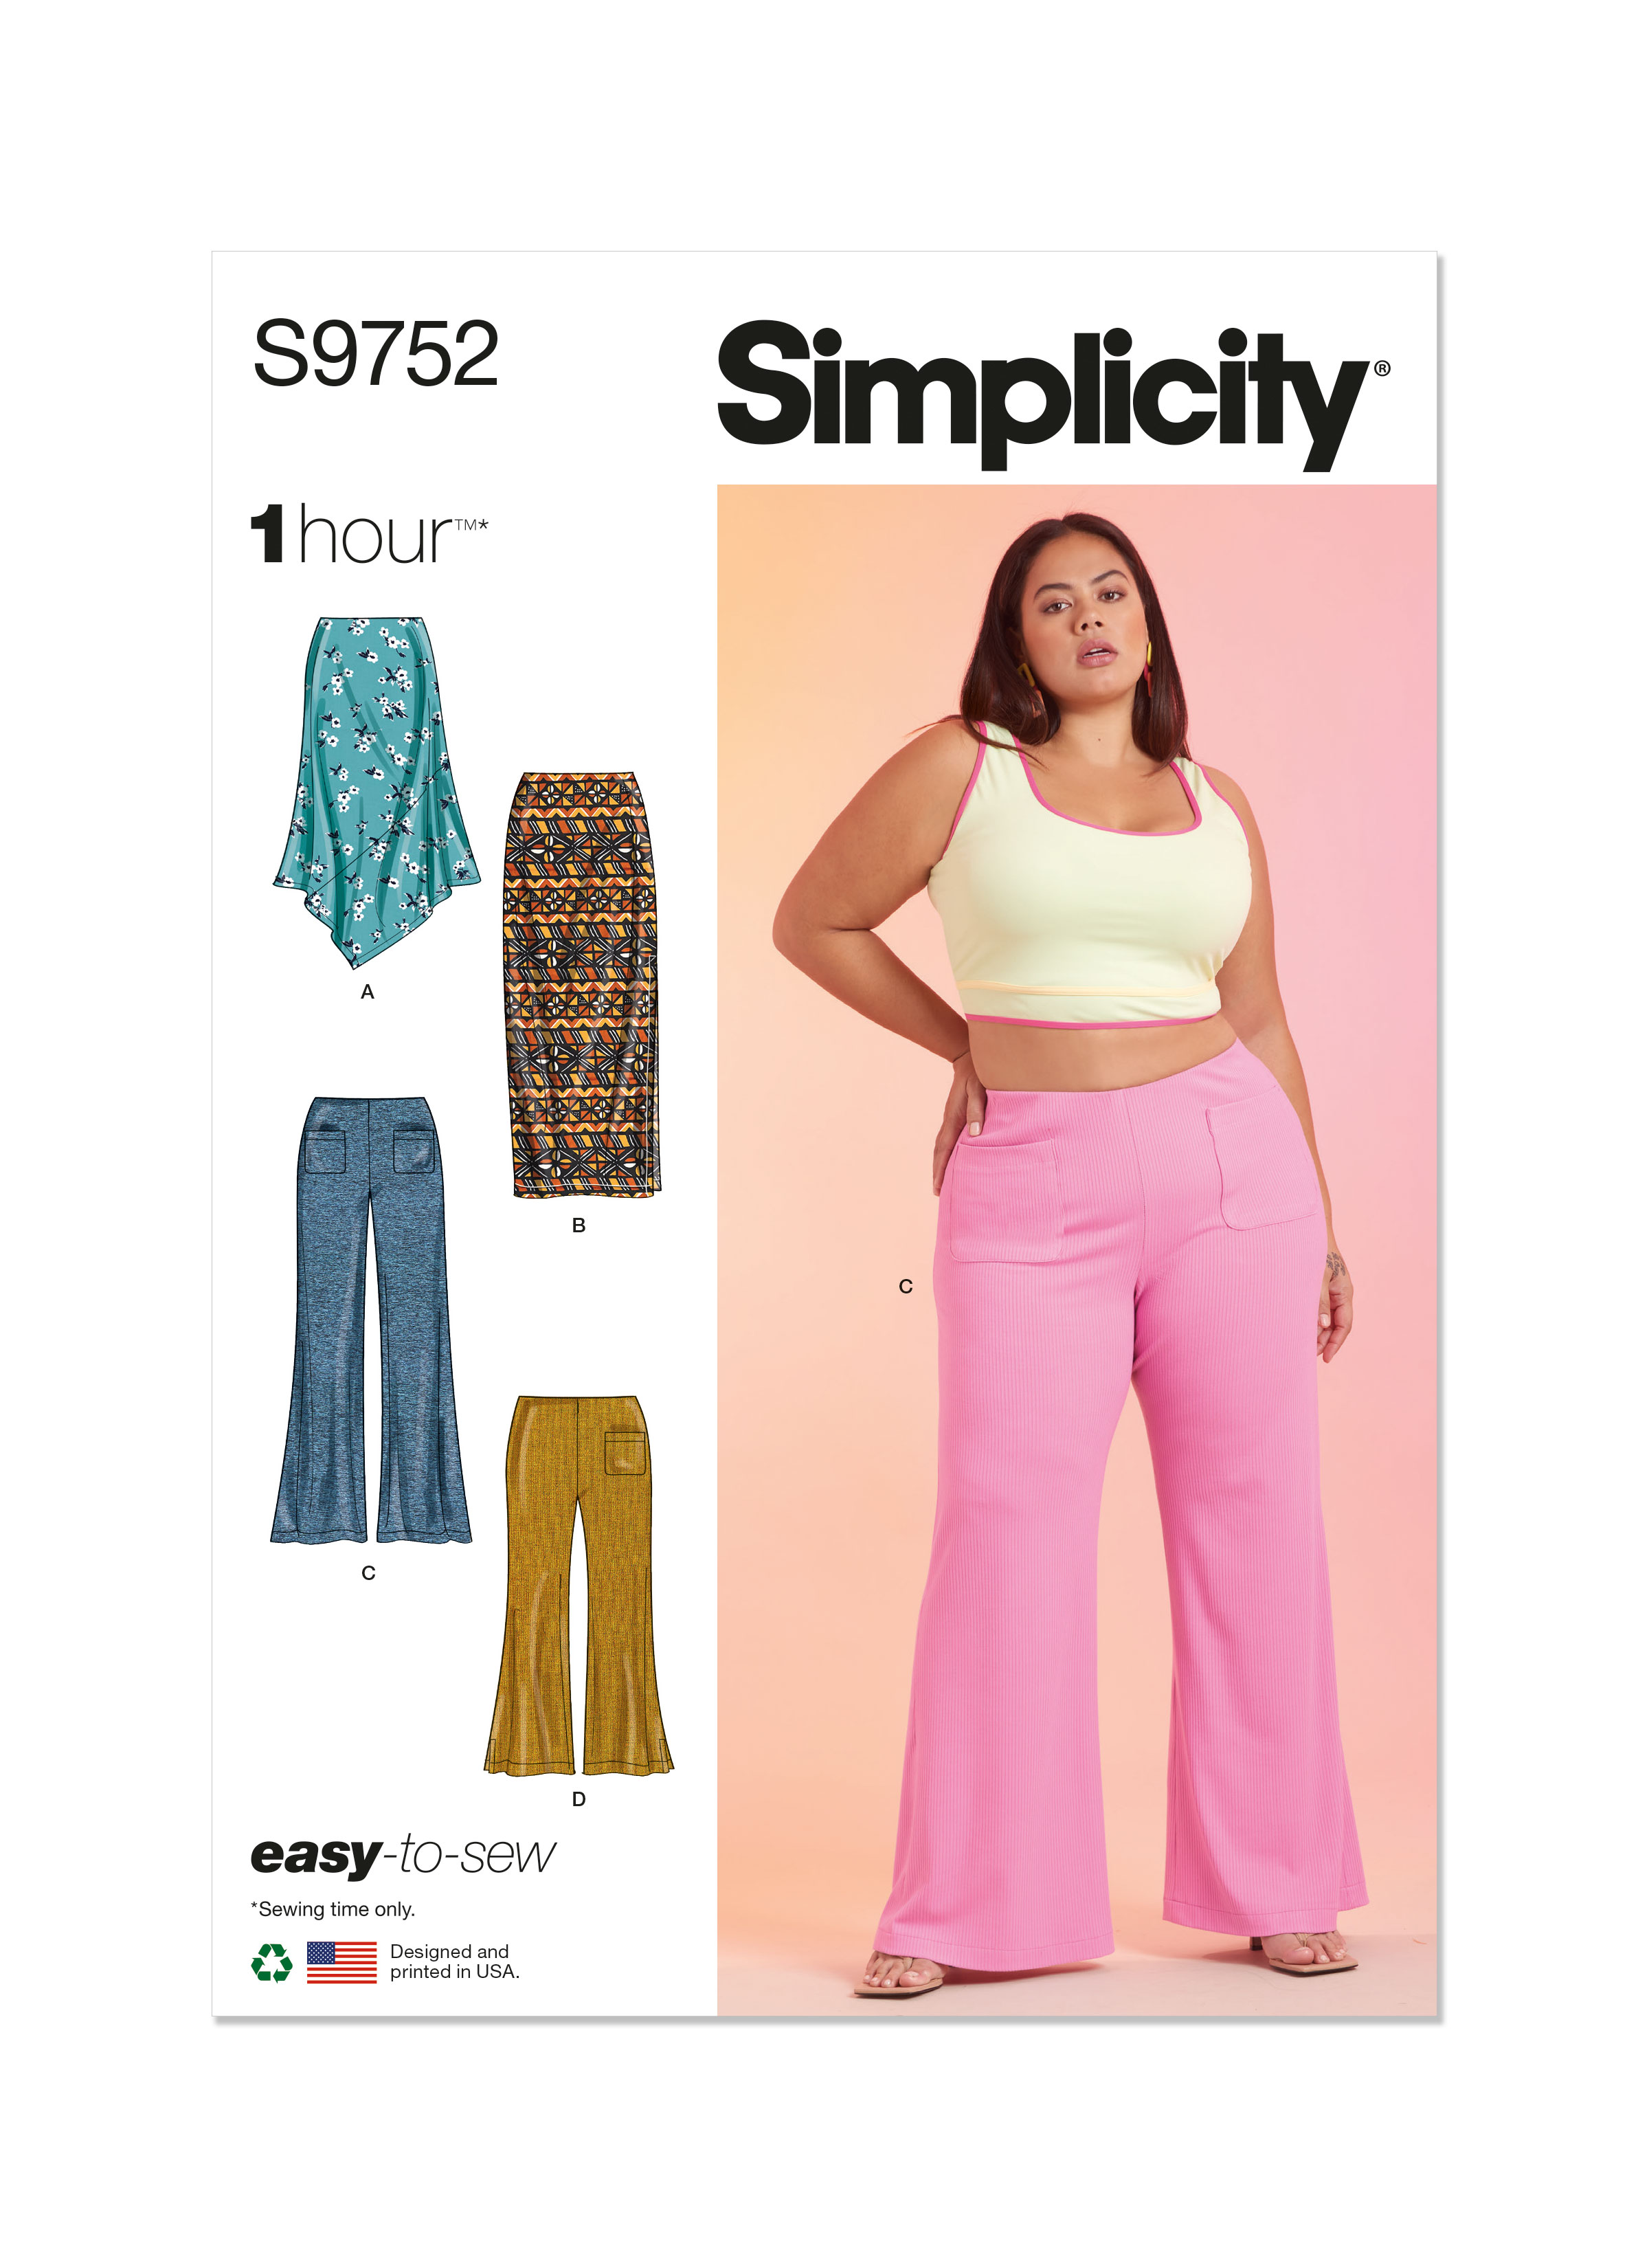 New Patterns - Vogue Patterns, McCall's, Butterick and Simplicity  5/26/23 - PatternReview.com Blog